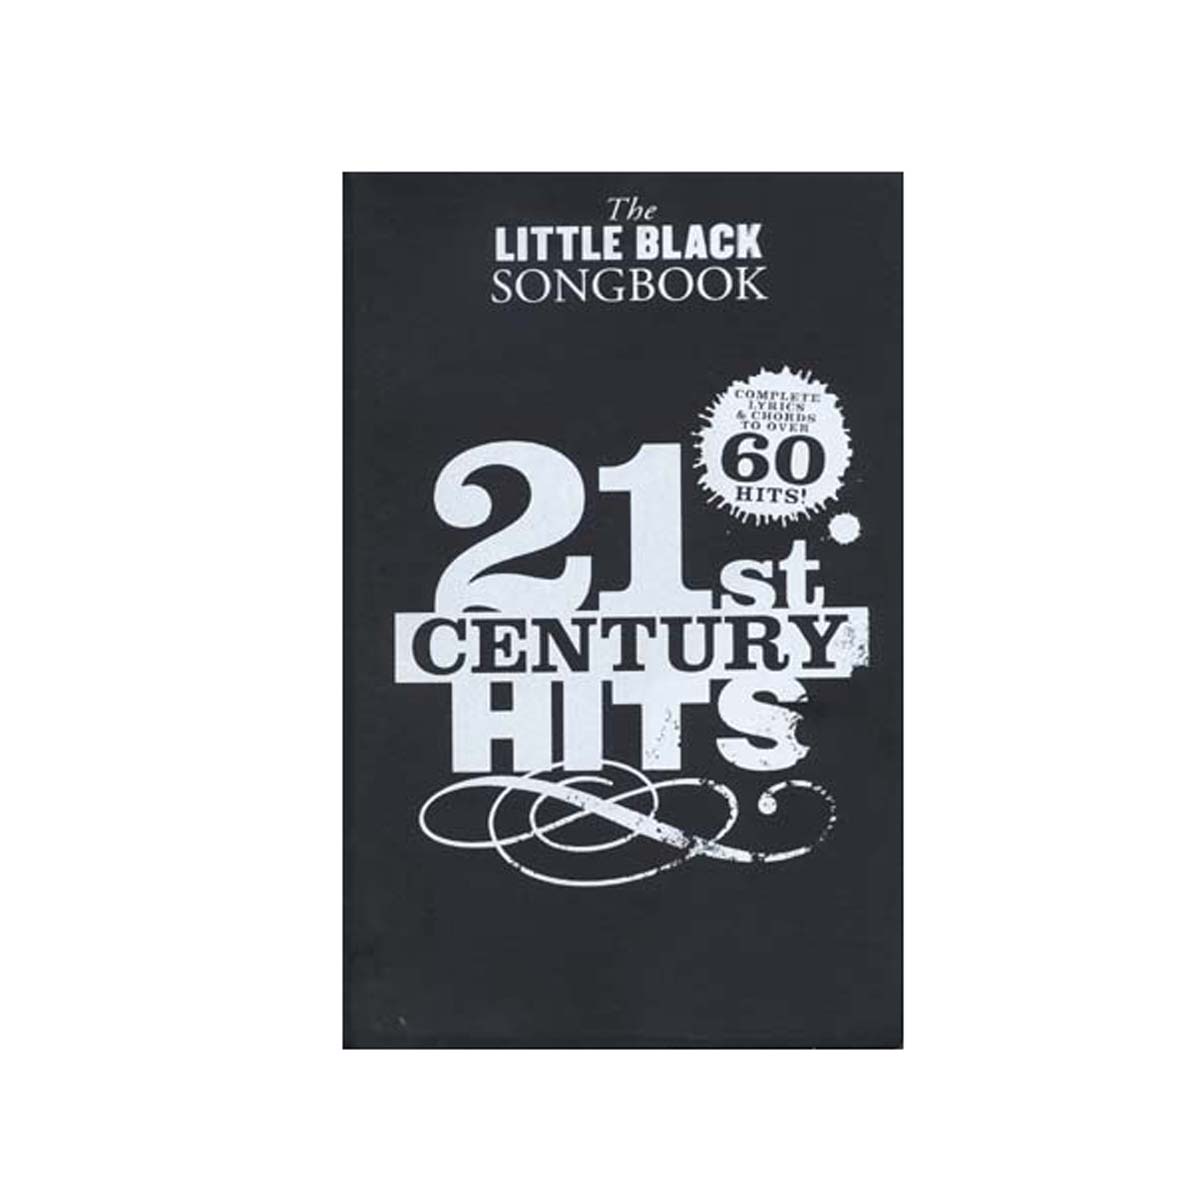 The little black songbook 21st century hits